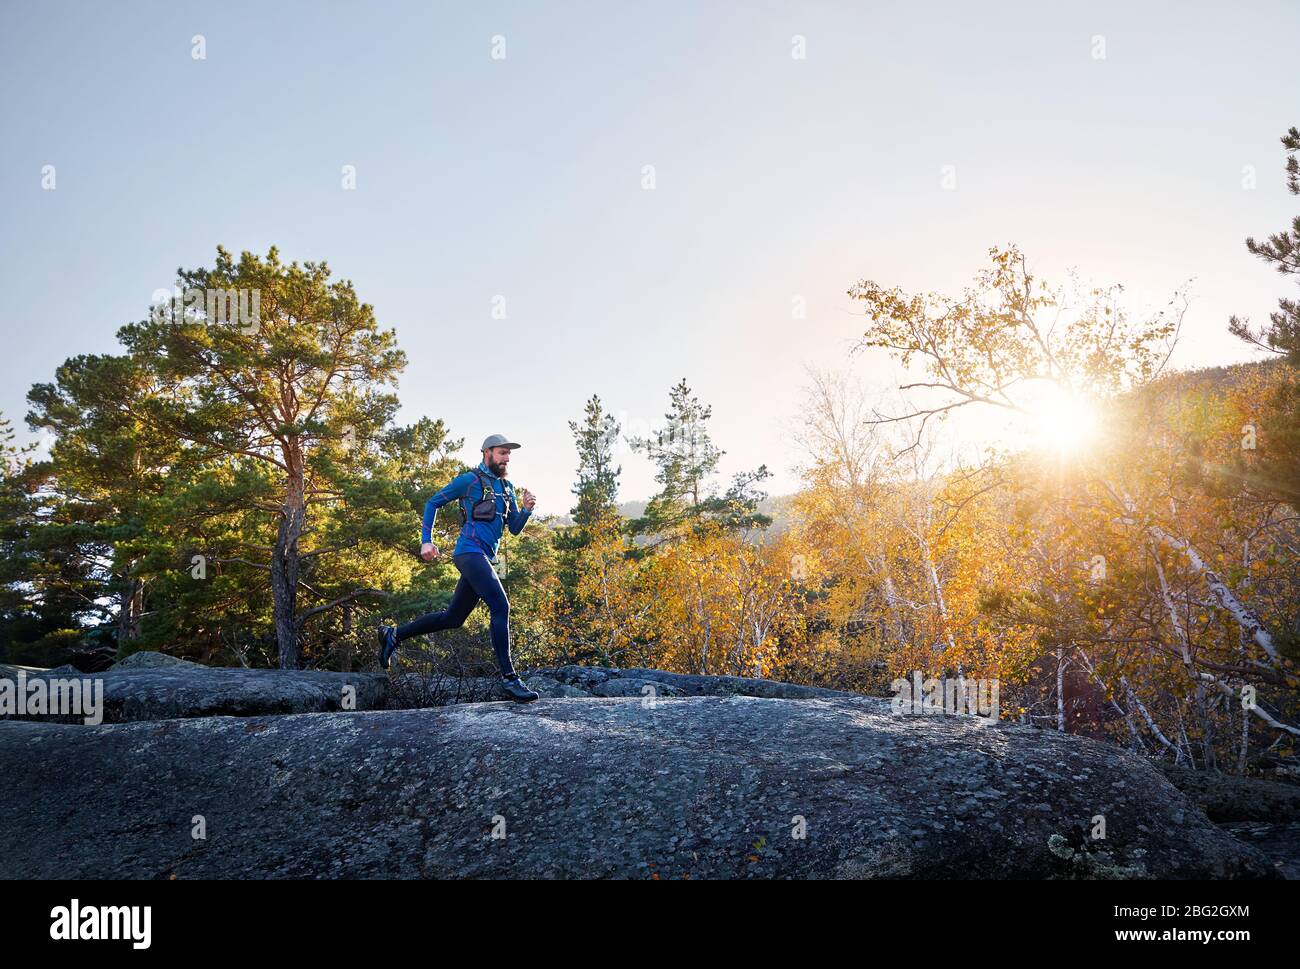 Runner athlete with beard in blue costume running on the trail in the mountains Stock Photo